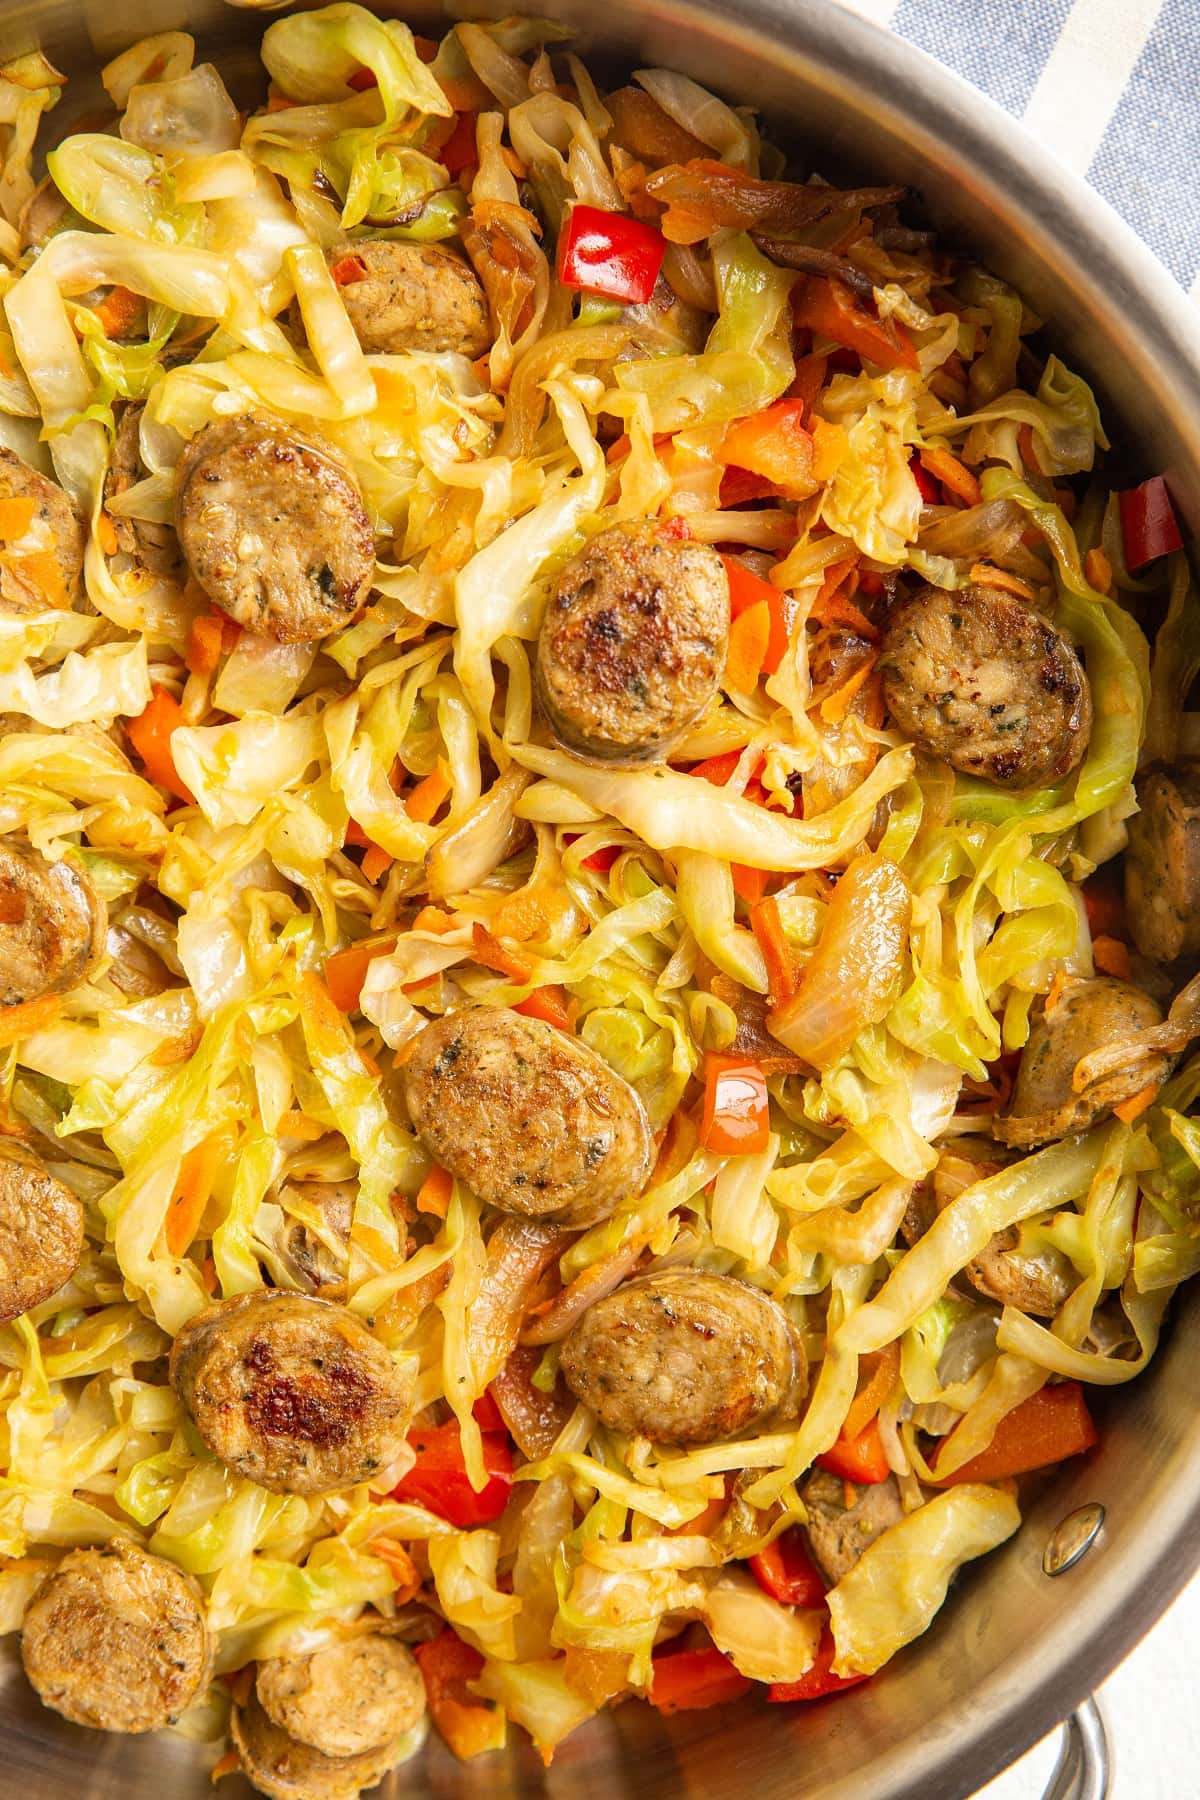 30-Minute Cabbage and Sausage Skillet